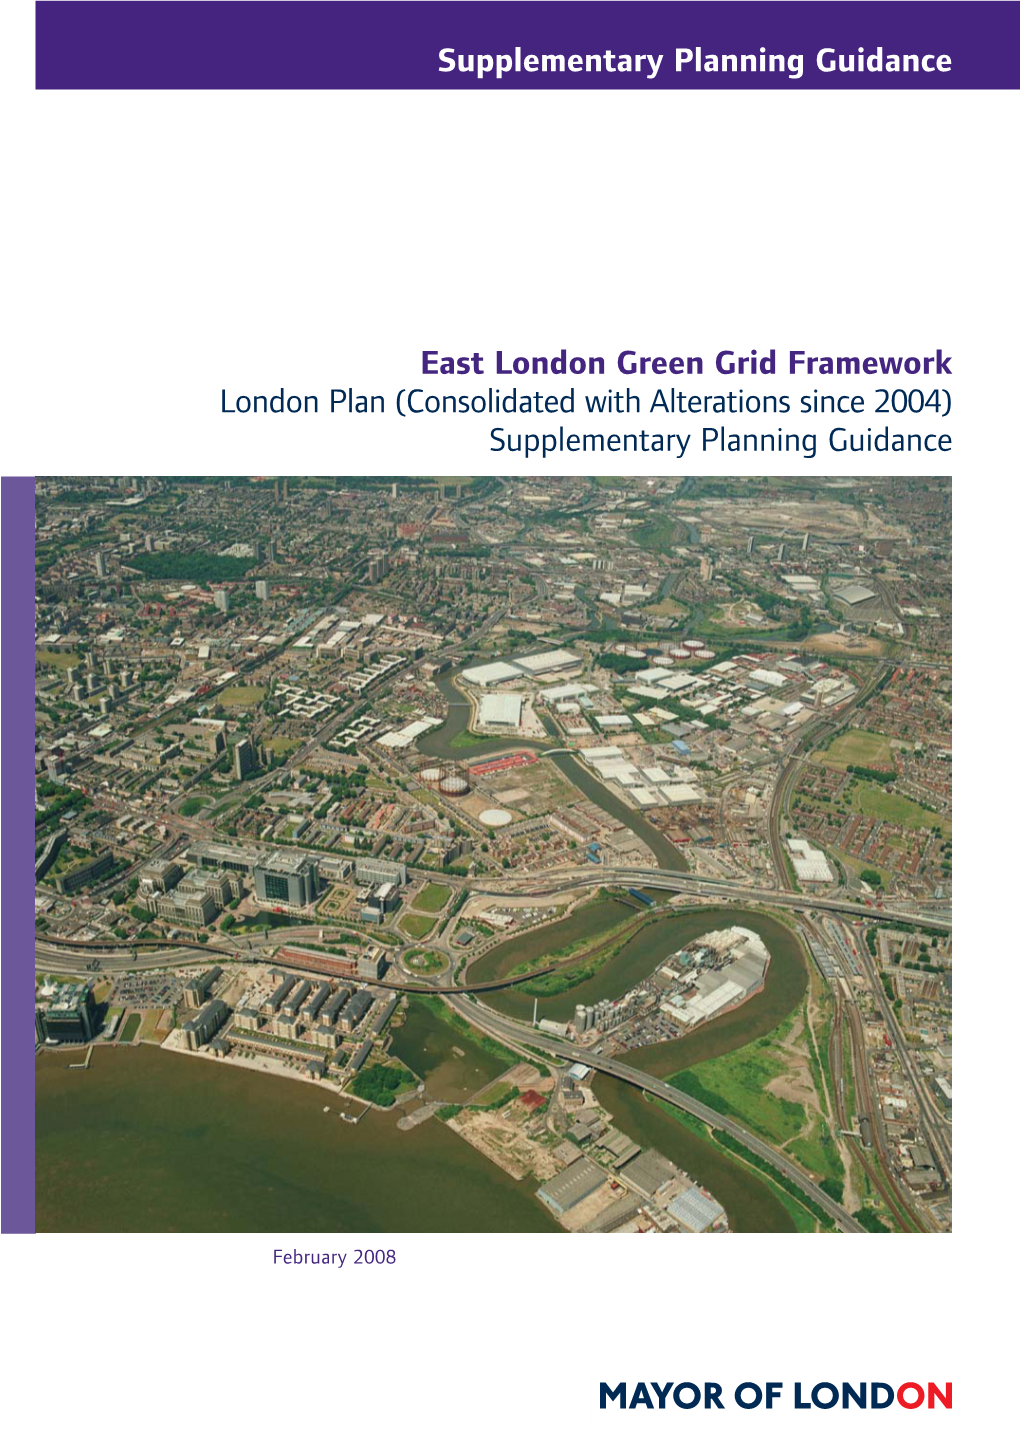 East London Green Grid Framework London Plan (Consolidated with Alterations Since 2004) Supplementary Planning Guidance